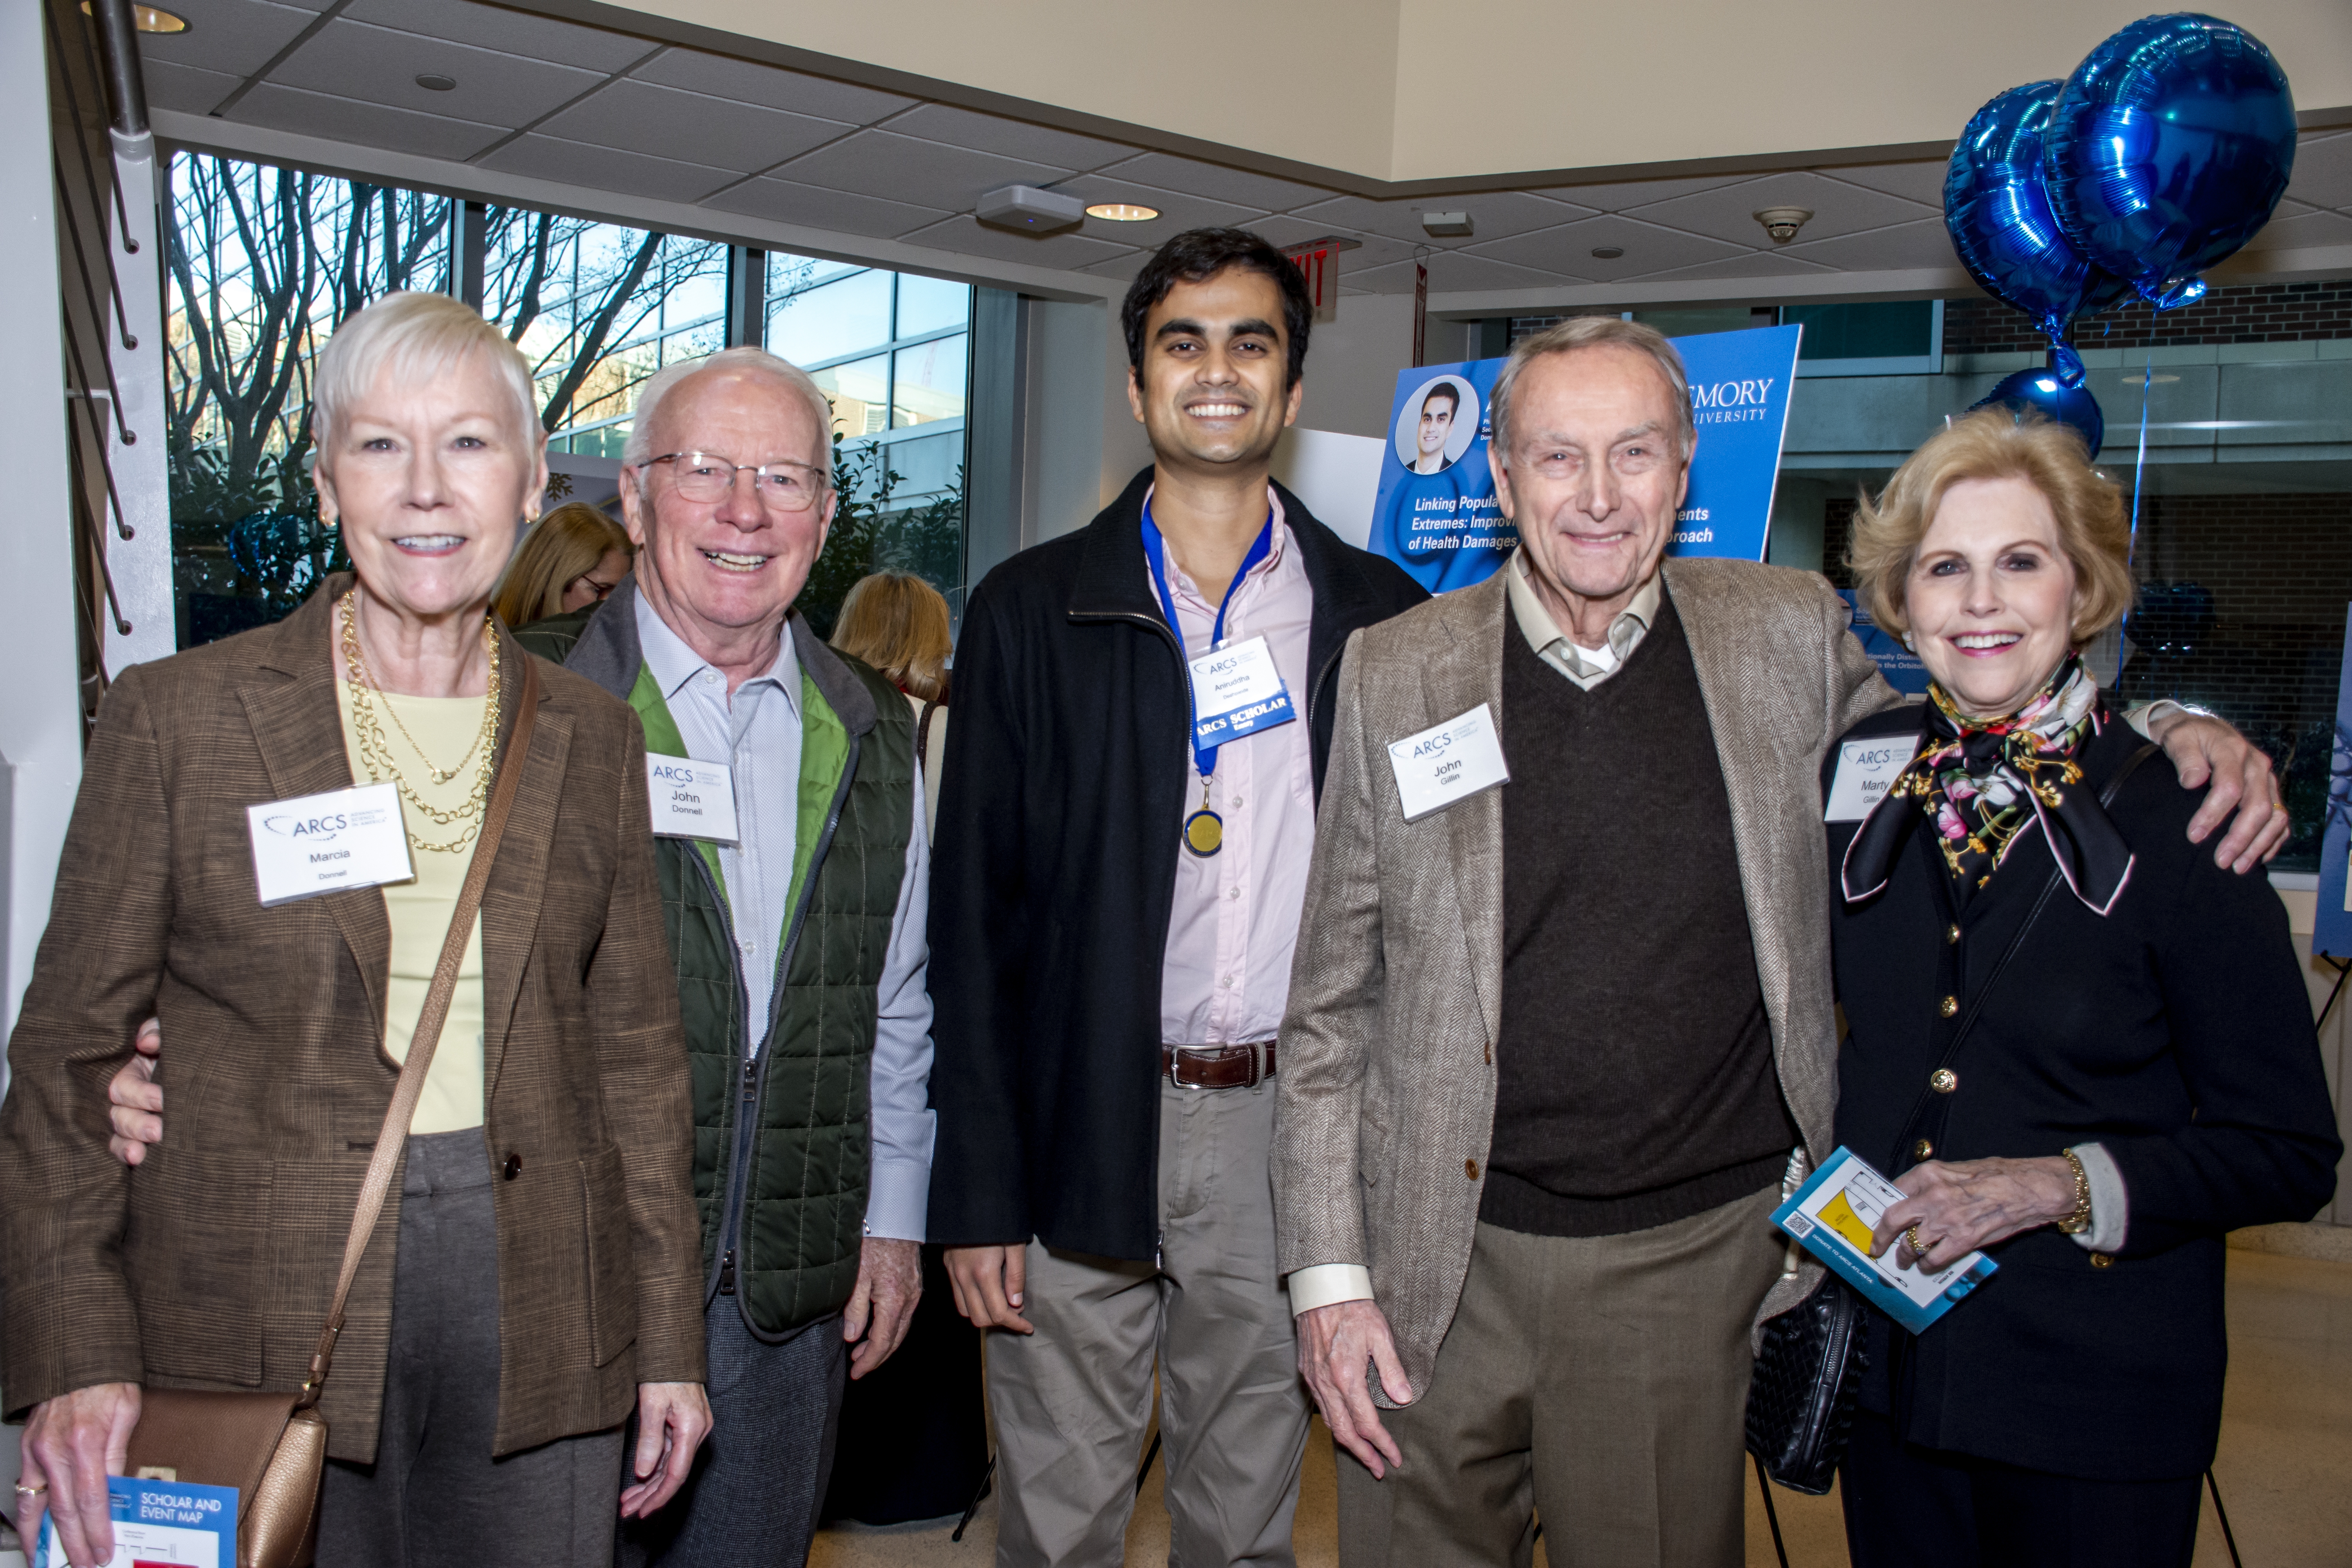 Marcia and John Donnell with their Emory Scholar Aniruddha Deshpande and Marty and John Gillin